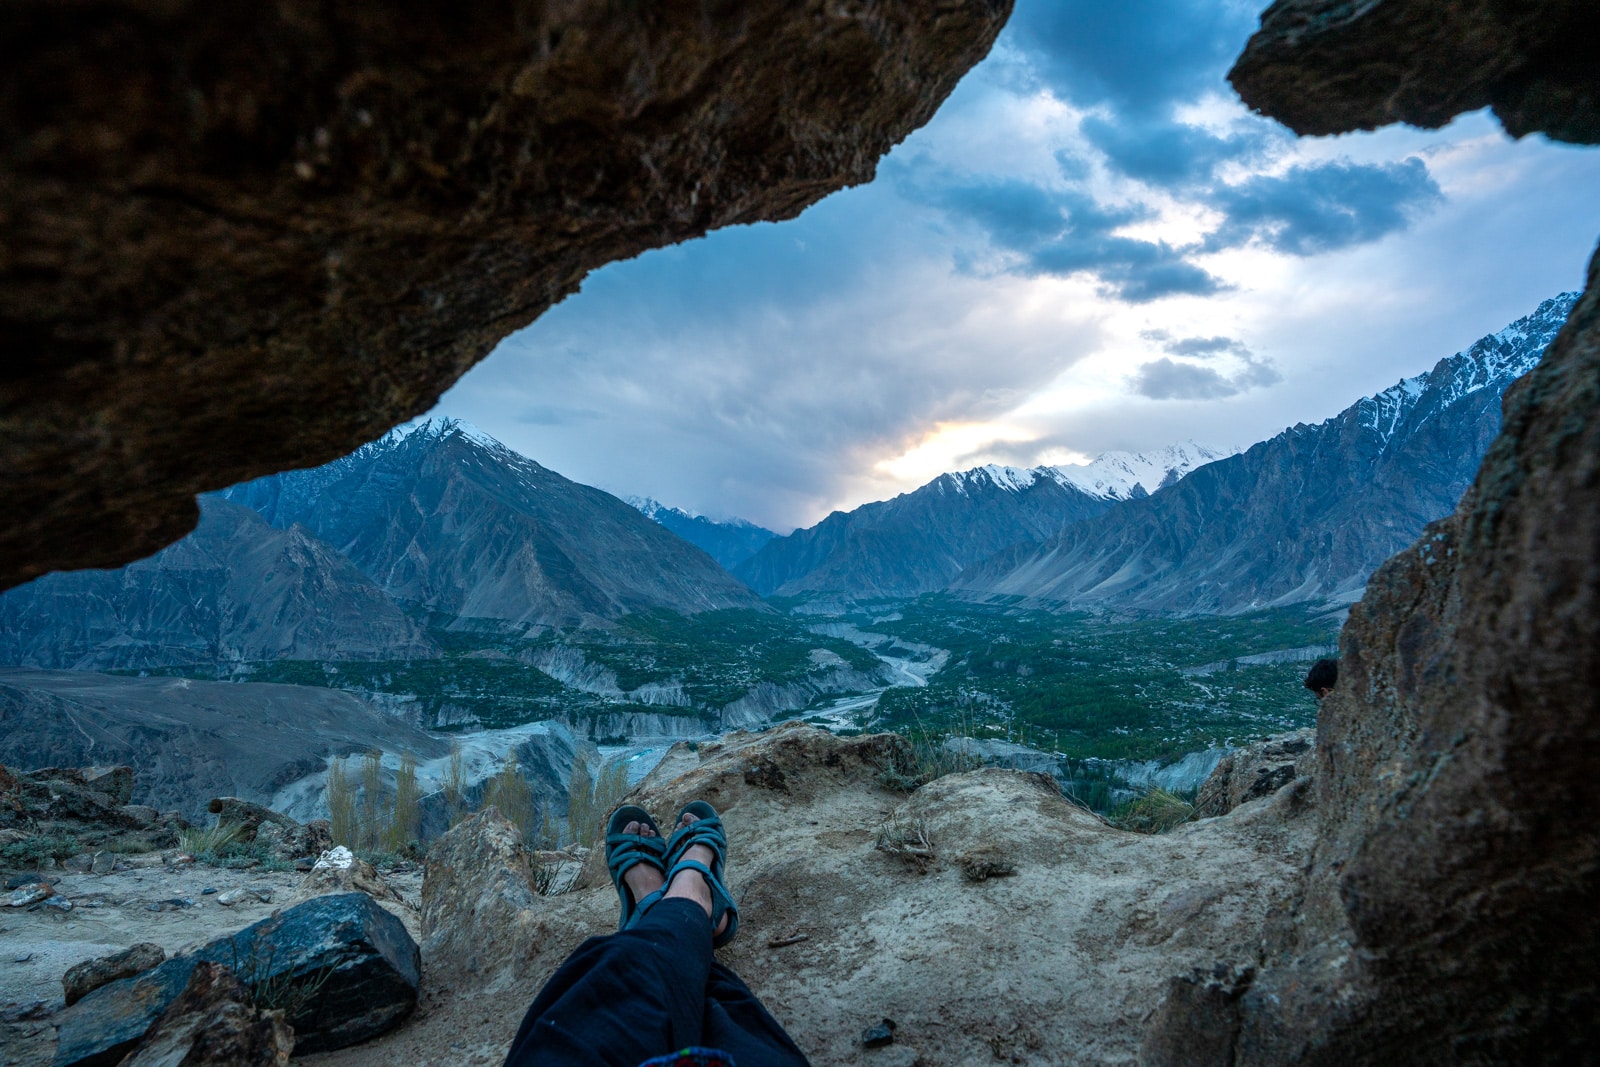 Feet and a view looking out over Hunza Valley, Pakistan